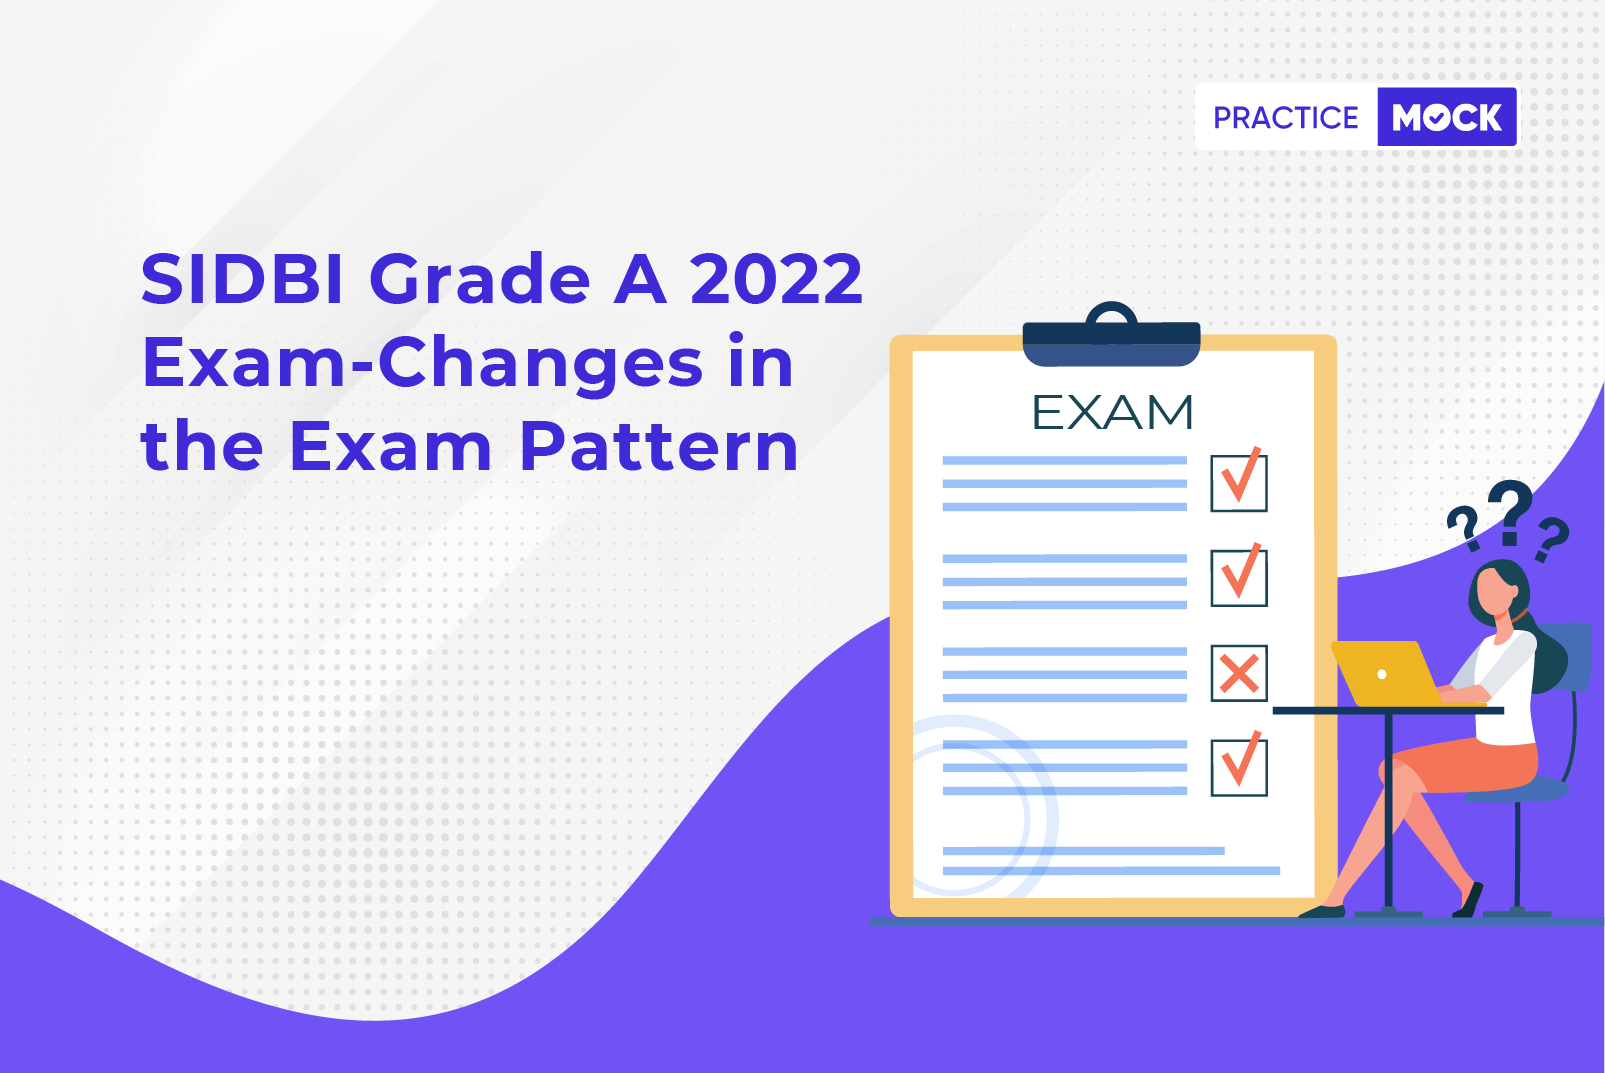 SIDBI Grade A 2022 Exam-Changes in the Exam Pattern